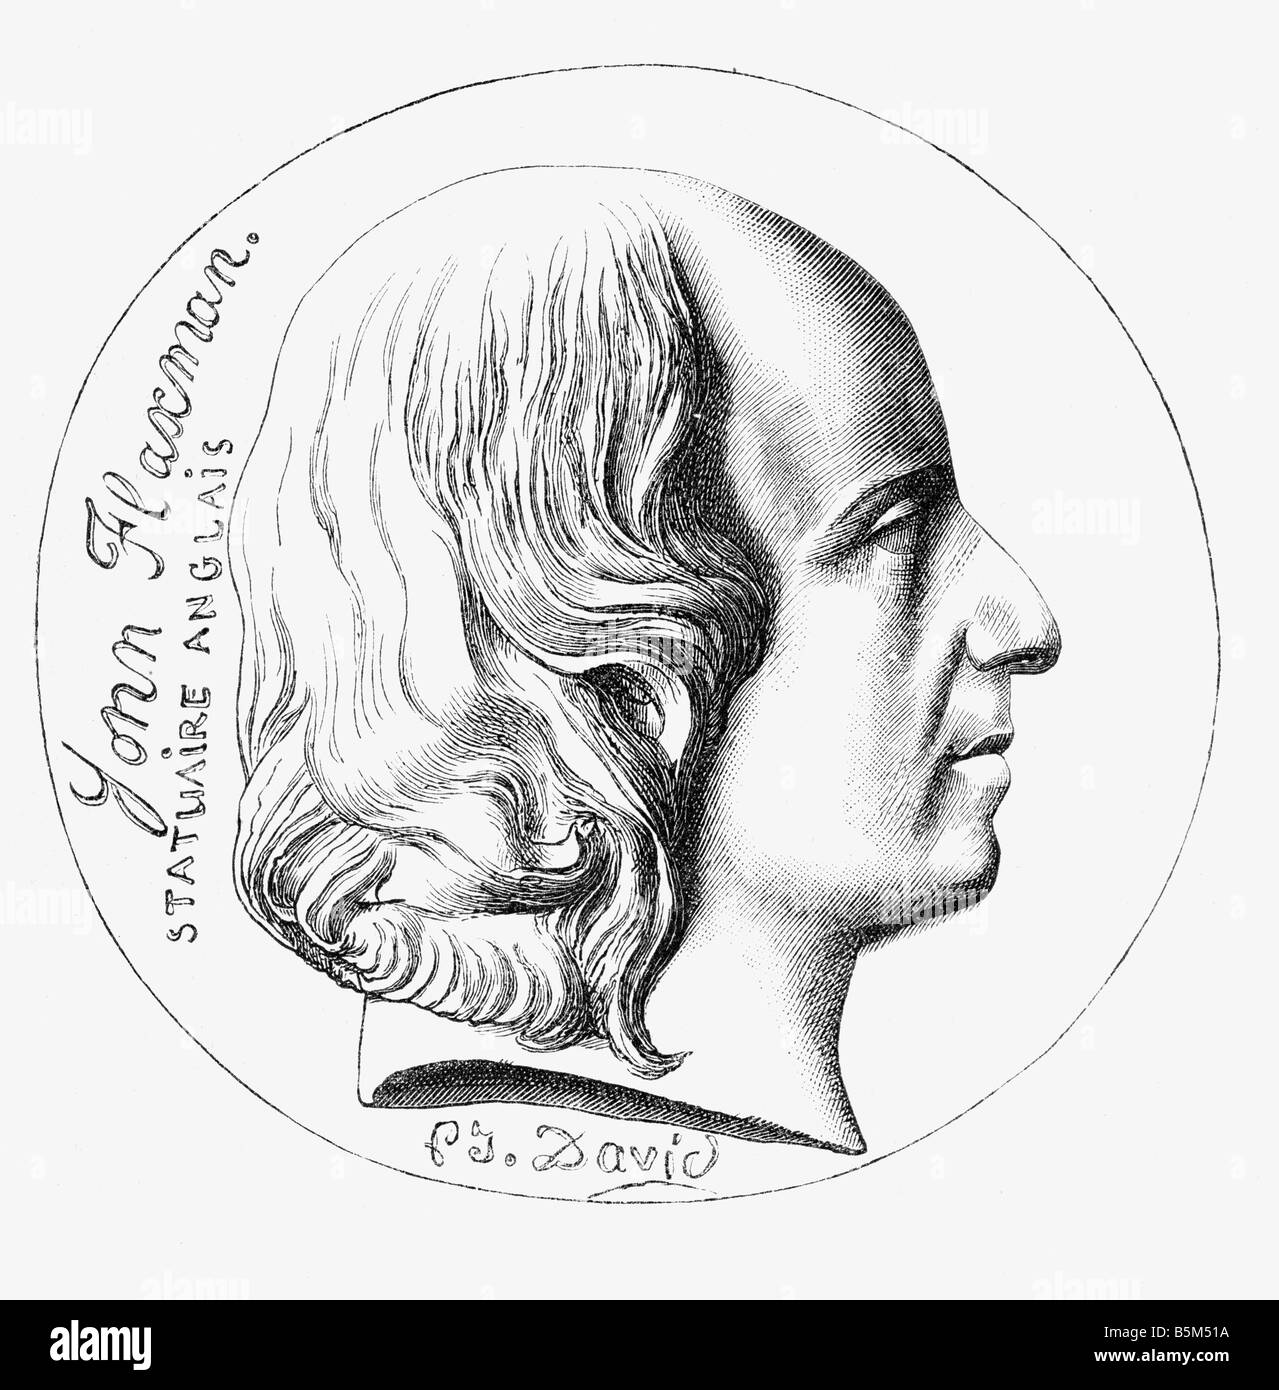 Flaxman, John, 6.7.1755 - 7.12.1826, English draughtsman, sculptor, portrait, side view, after relief by David, 19th century, Stock Photo